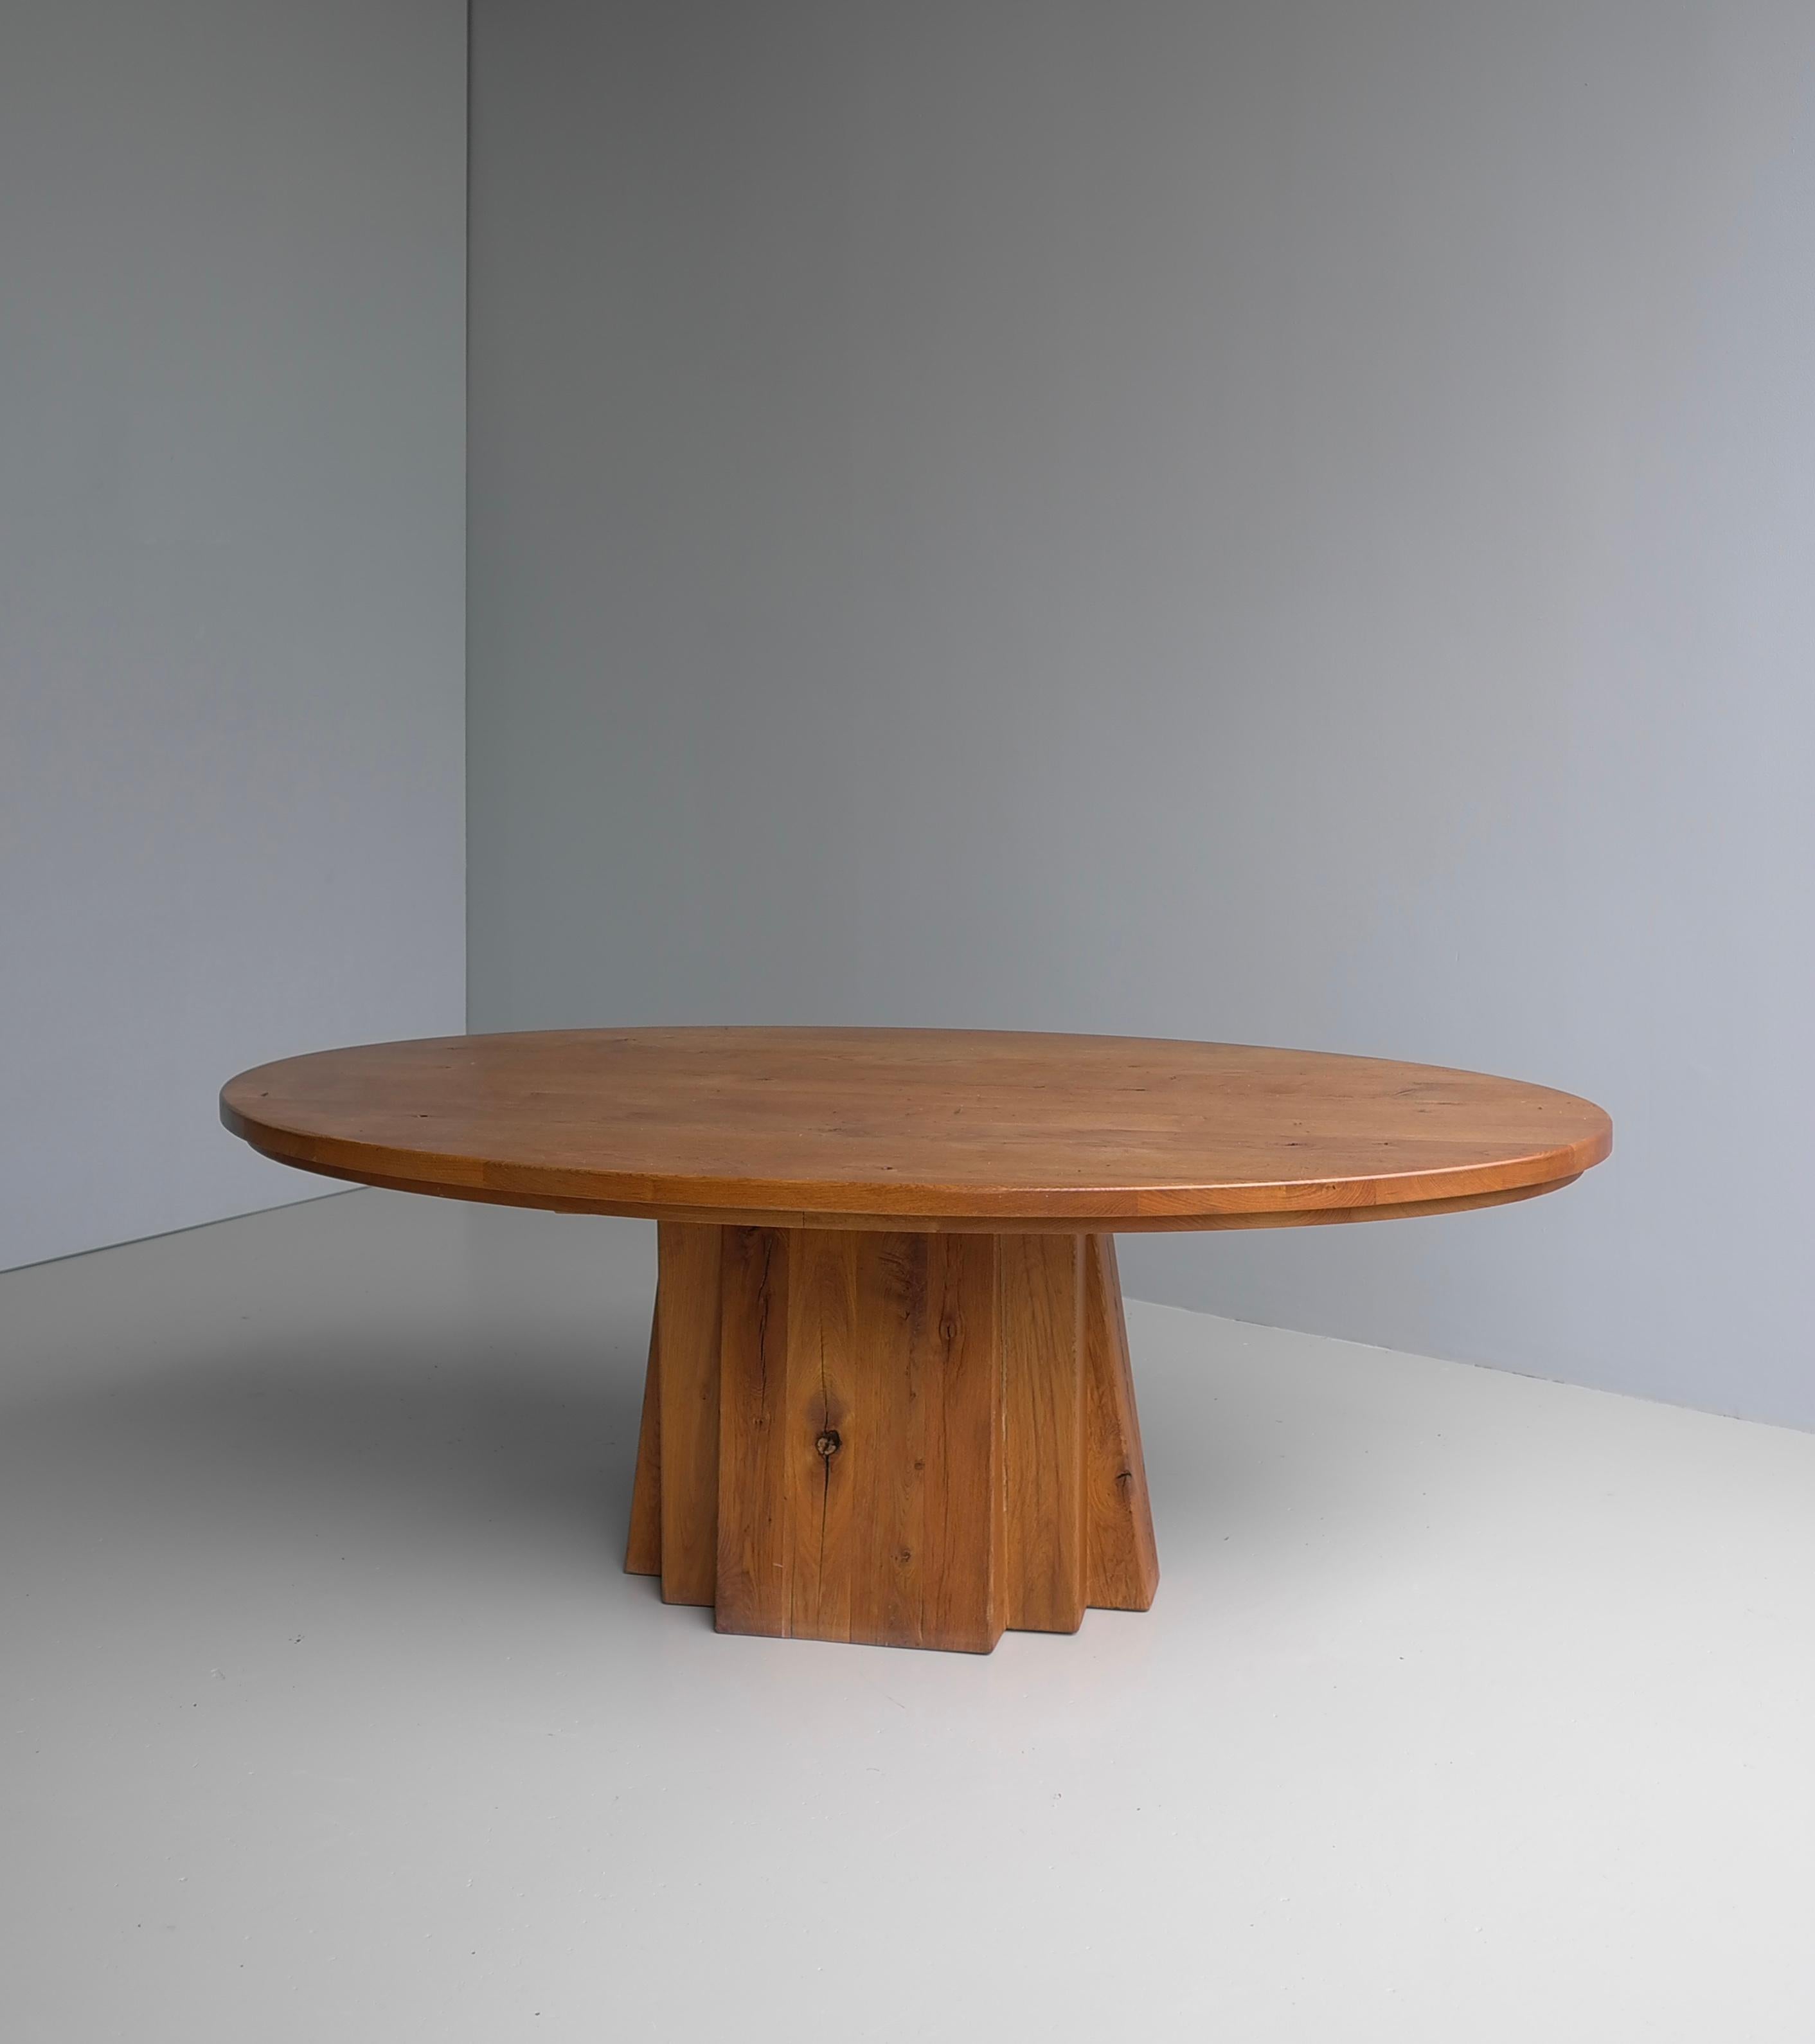 Large Oval Solid Oak Dining Table in style of Pierre Chapo, France circa 1970

This large Oval table is made from solid Oak with a unique Sculptural wooden base, layered large pieces of Oak wood. Very heavy and solid piece, lovely texture from the